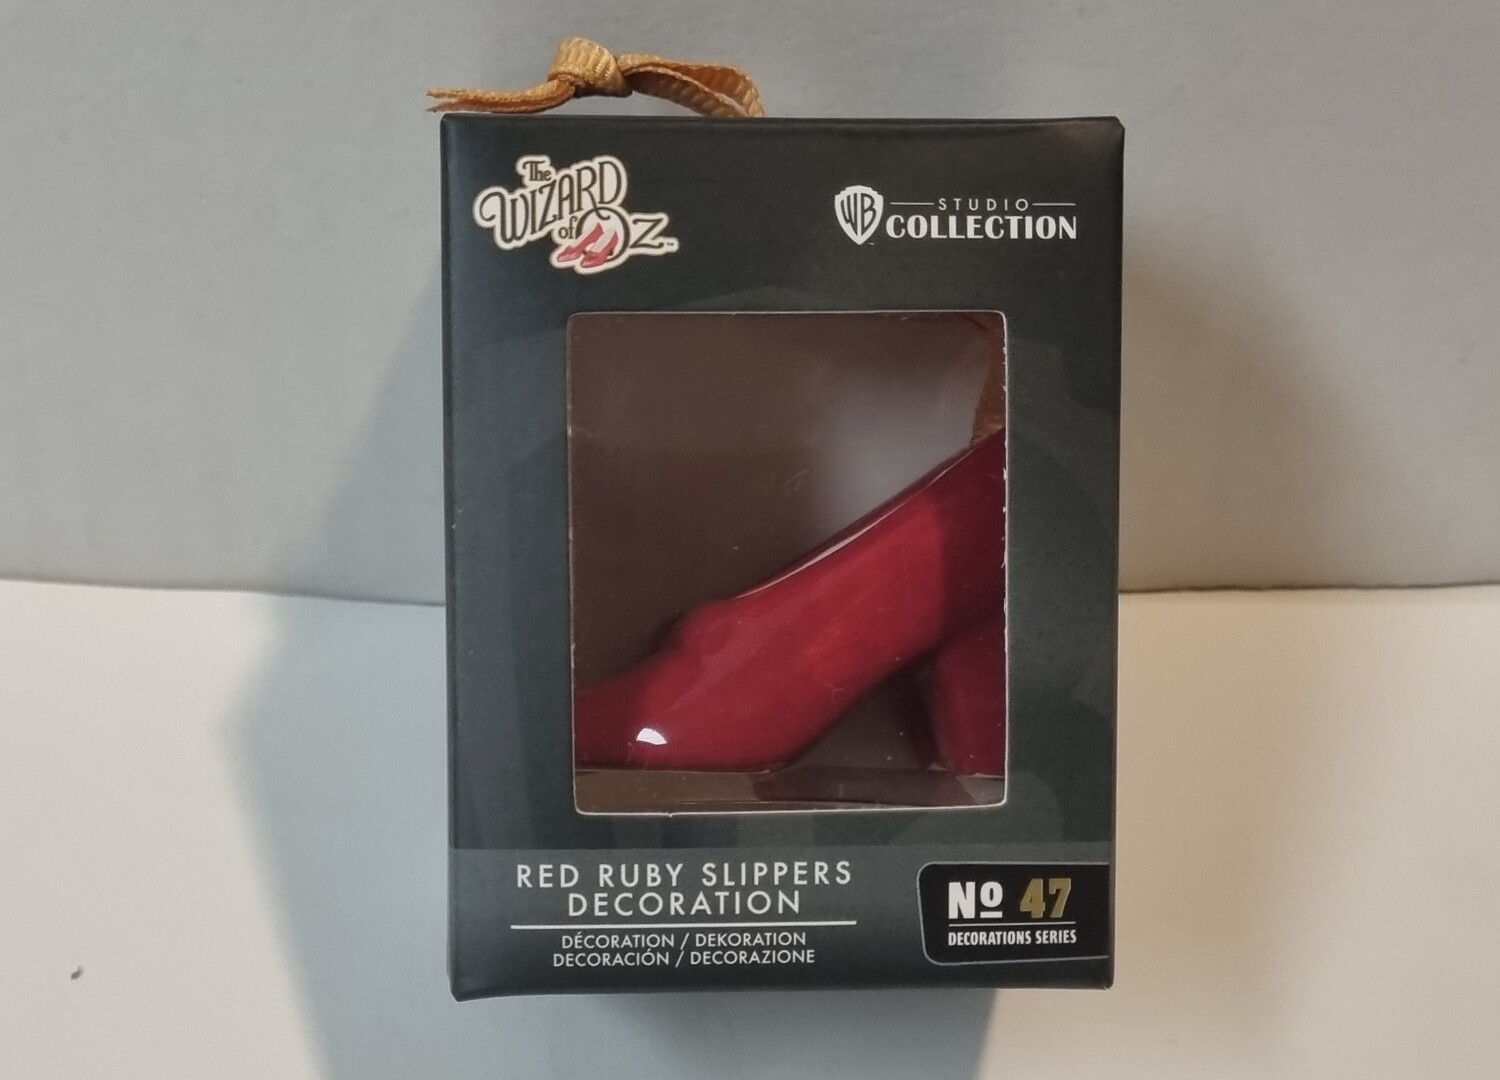 The Wizard of Oz: Red Ruby Slippers Decoration